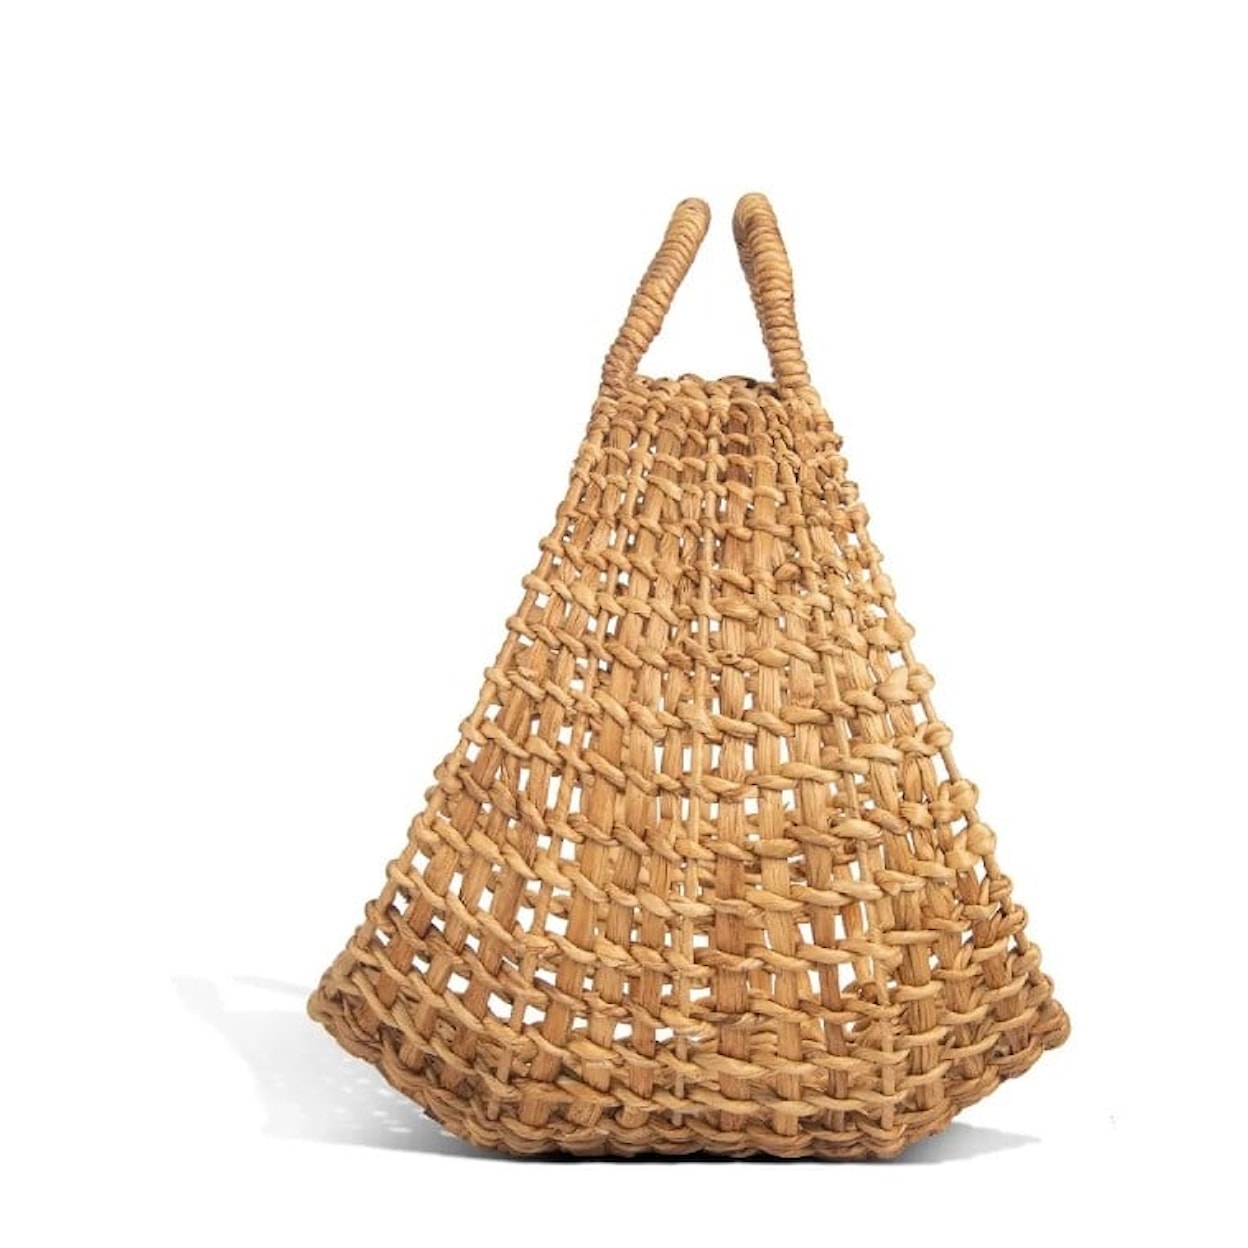 Ibolili Baskets and Sets WOVEN WATER HYACINTH CARRIER BASKET